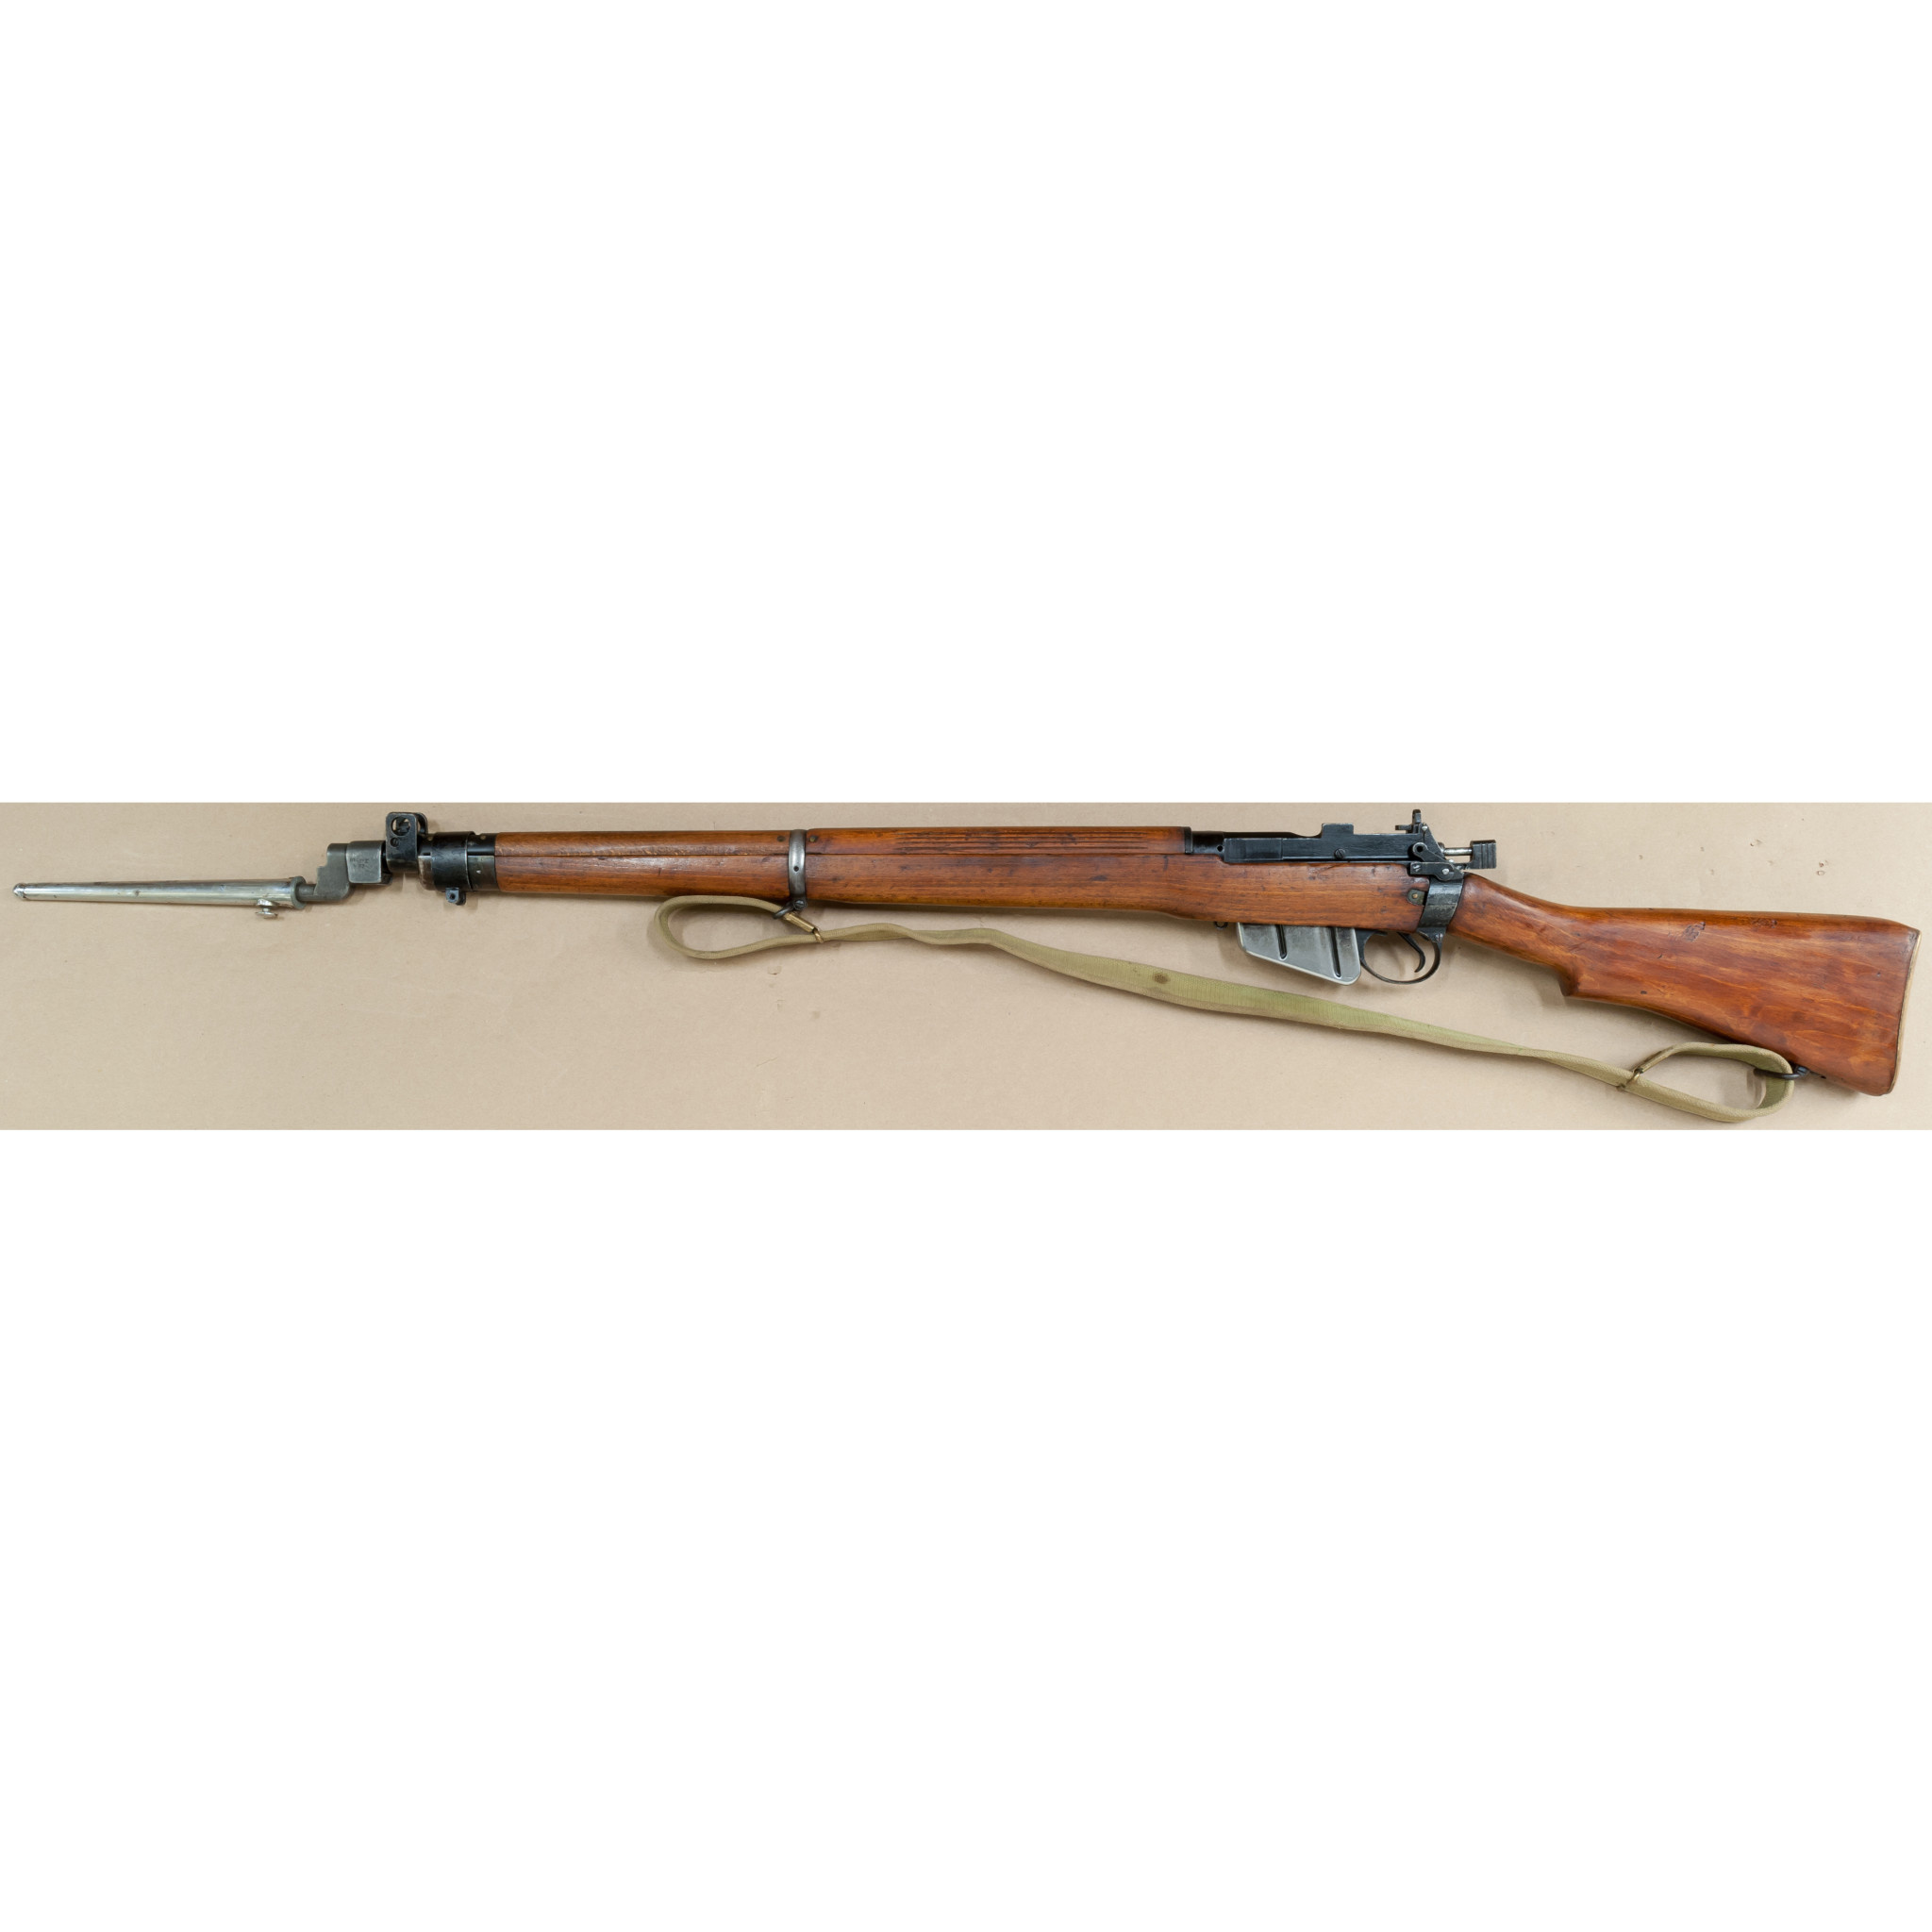 LEE ENFIELD NO 4 MK 1 FULL WOOD STOCK RIFLE 303 BRIT - Goble's Firearms